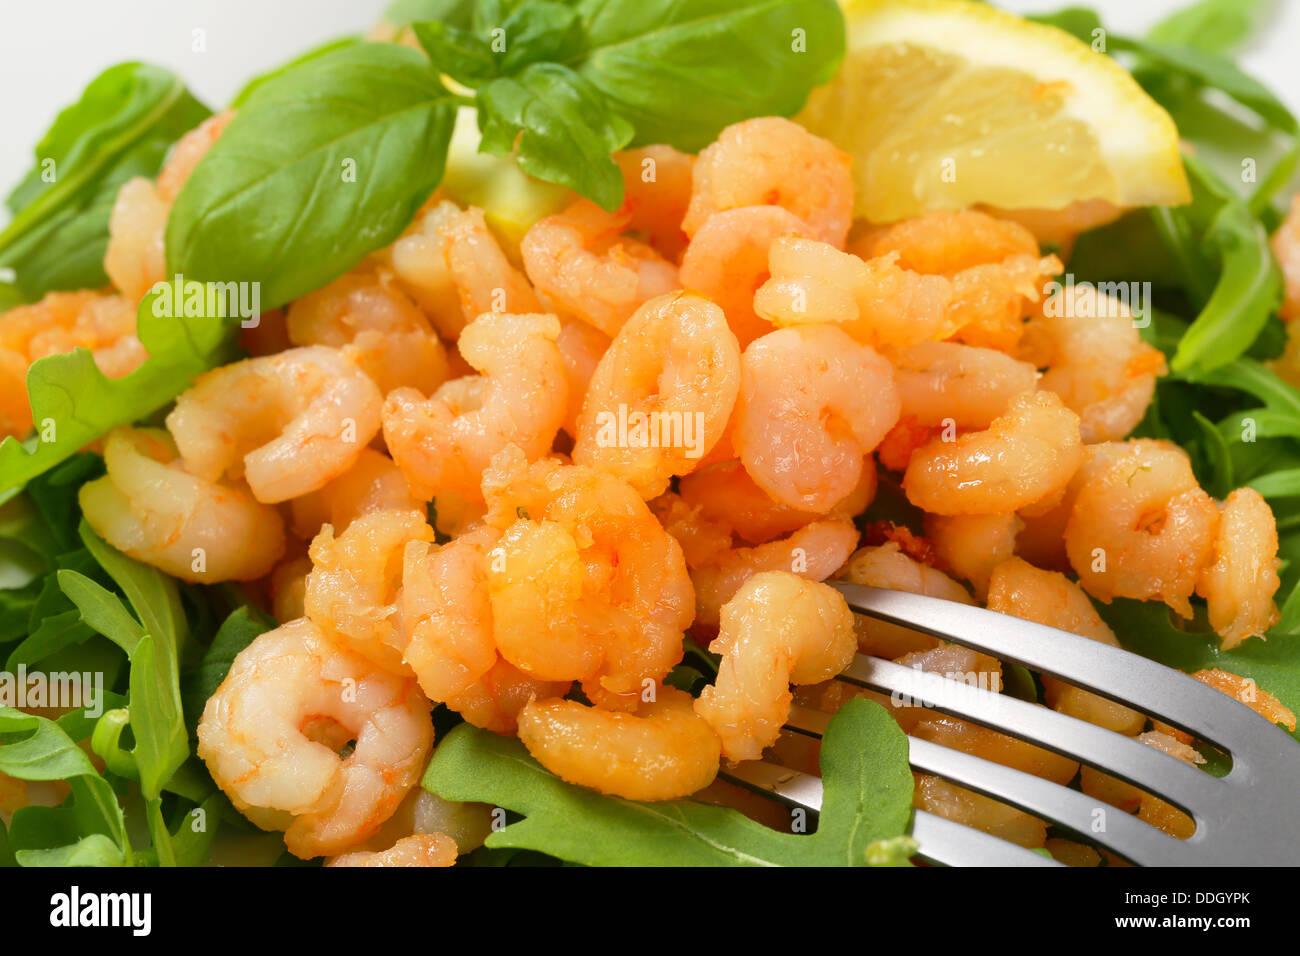 Spicy shrimps on bed of salad greens Stock Photo